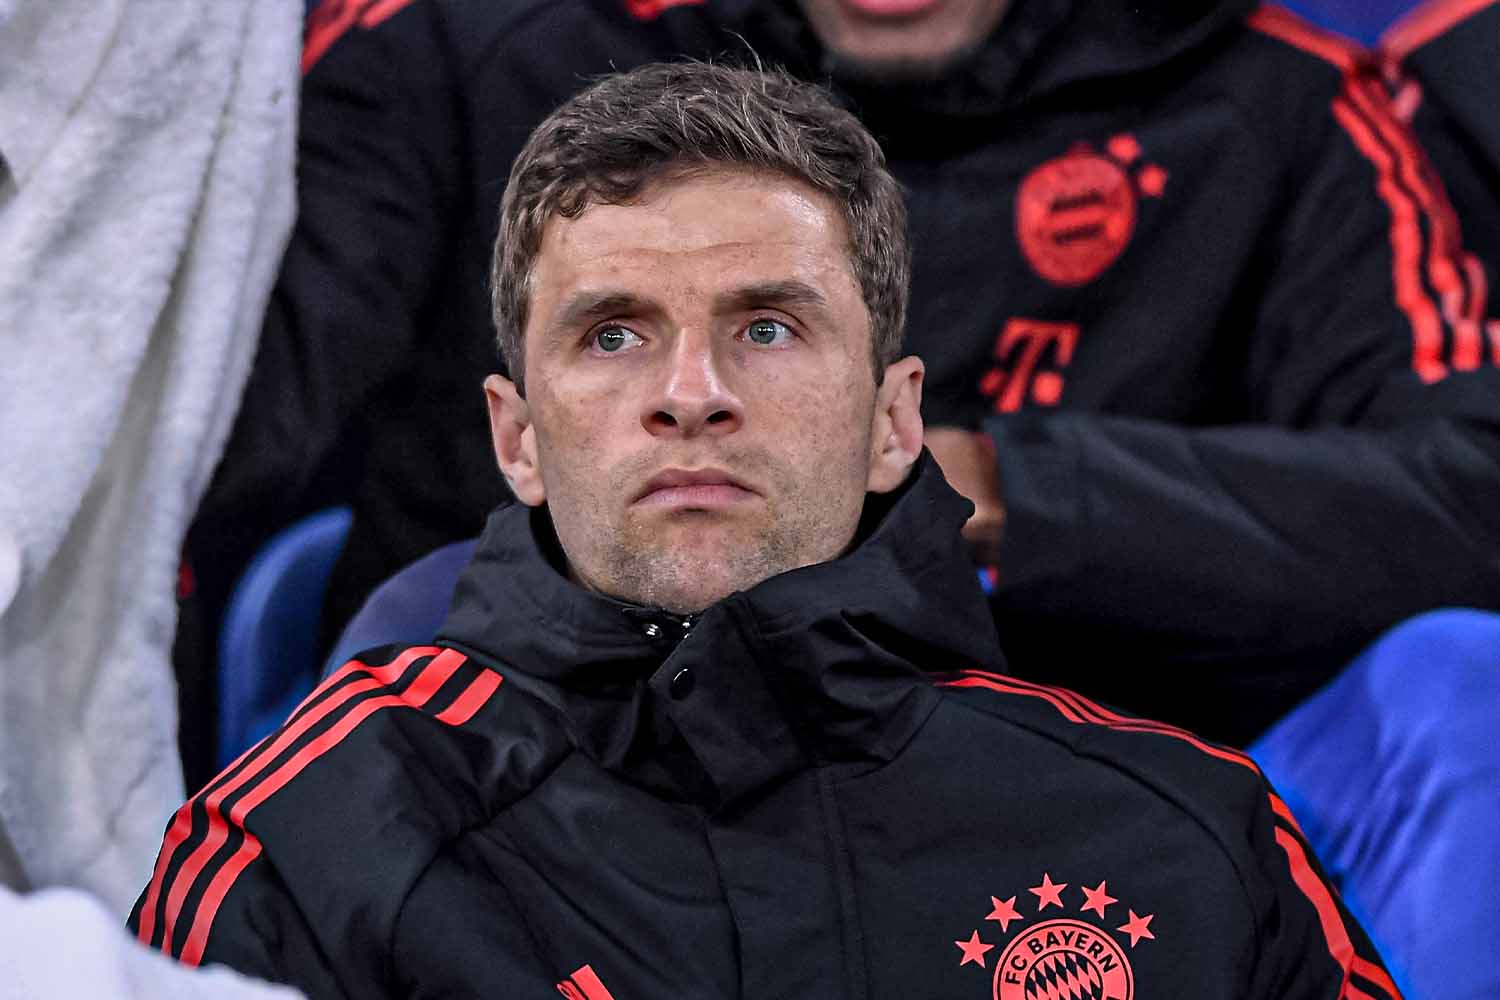 Thomas Müller on the bench